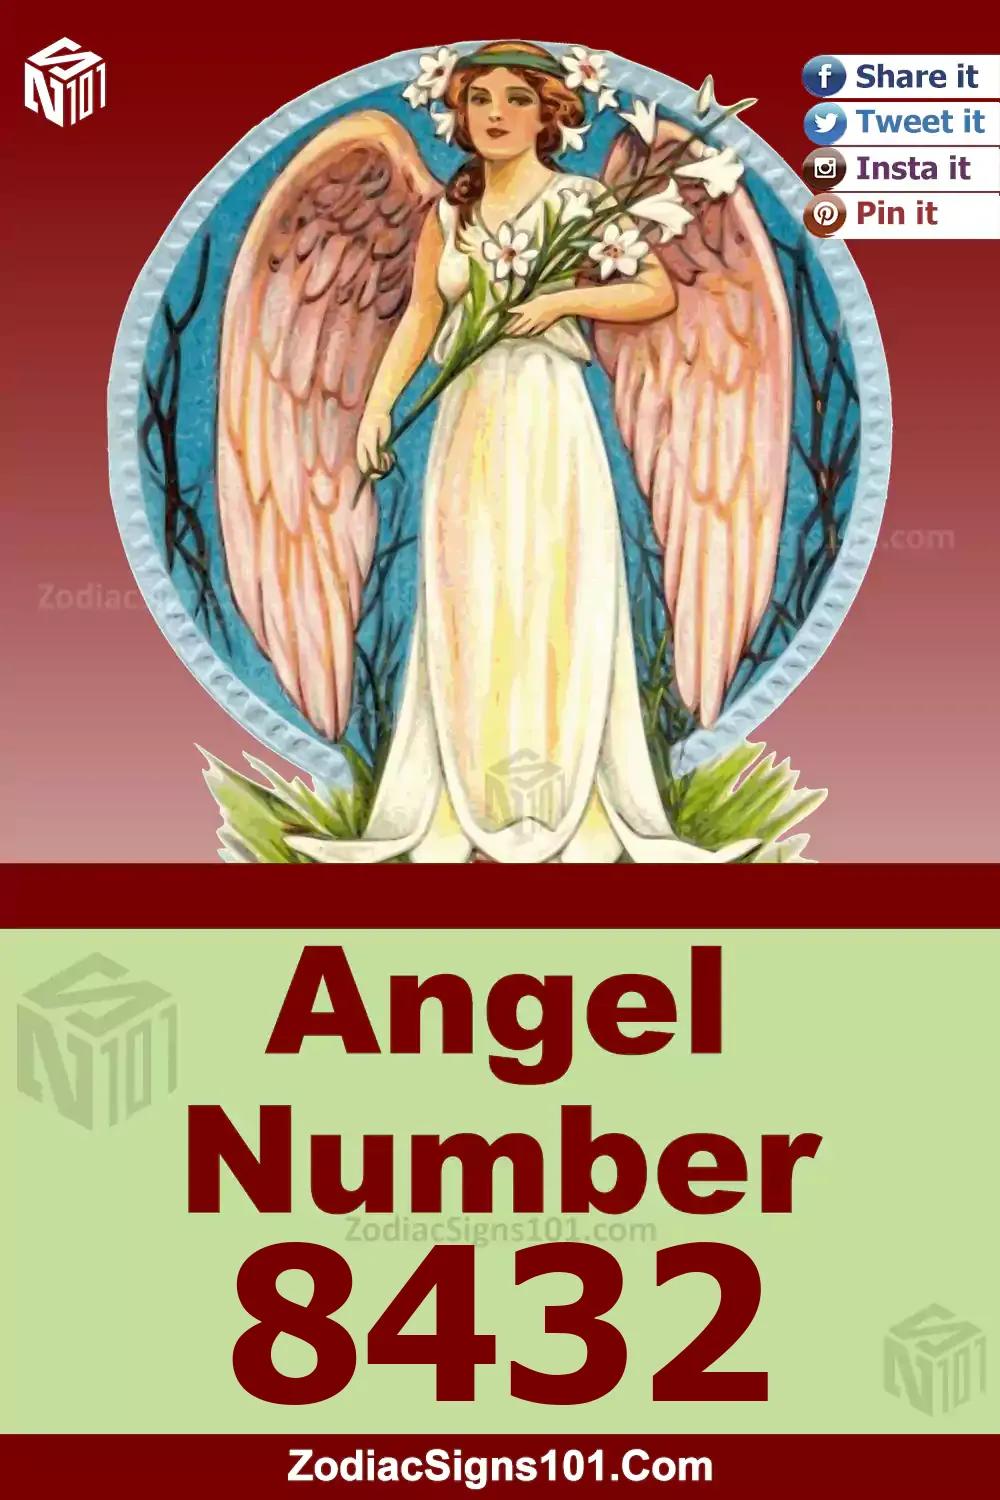 8432 Angel Number Meaning